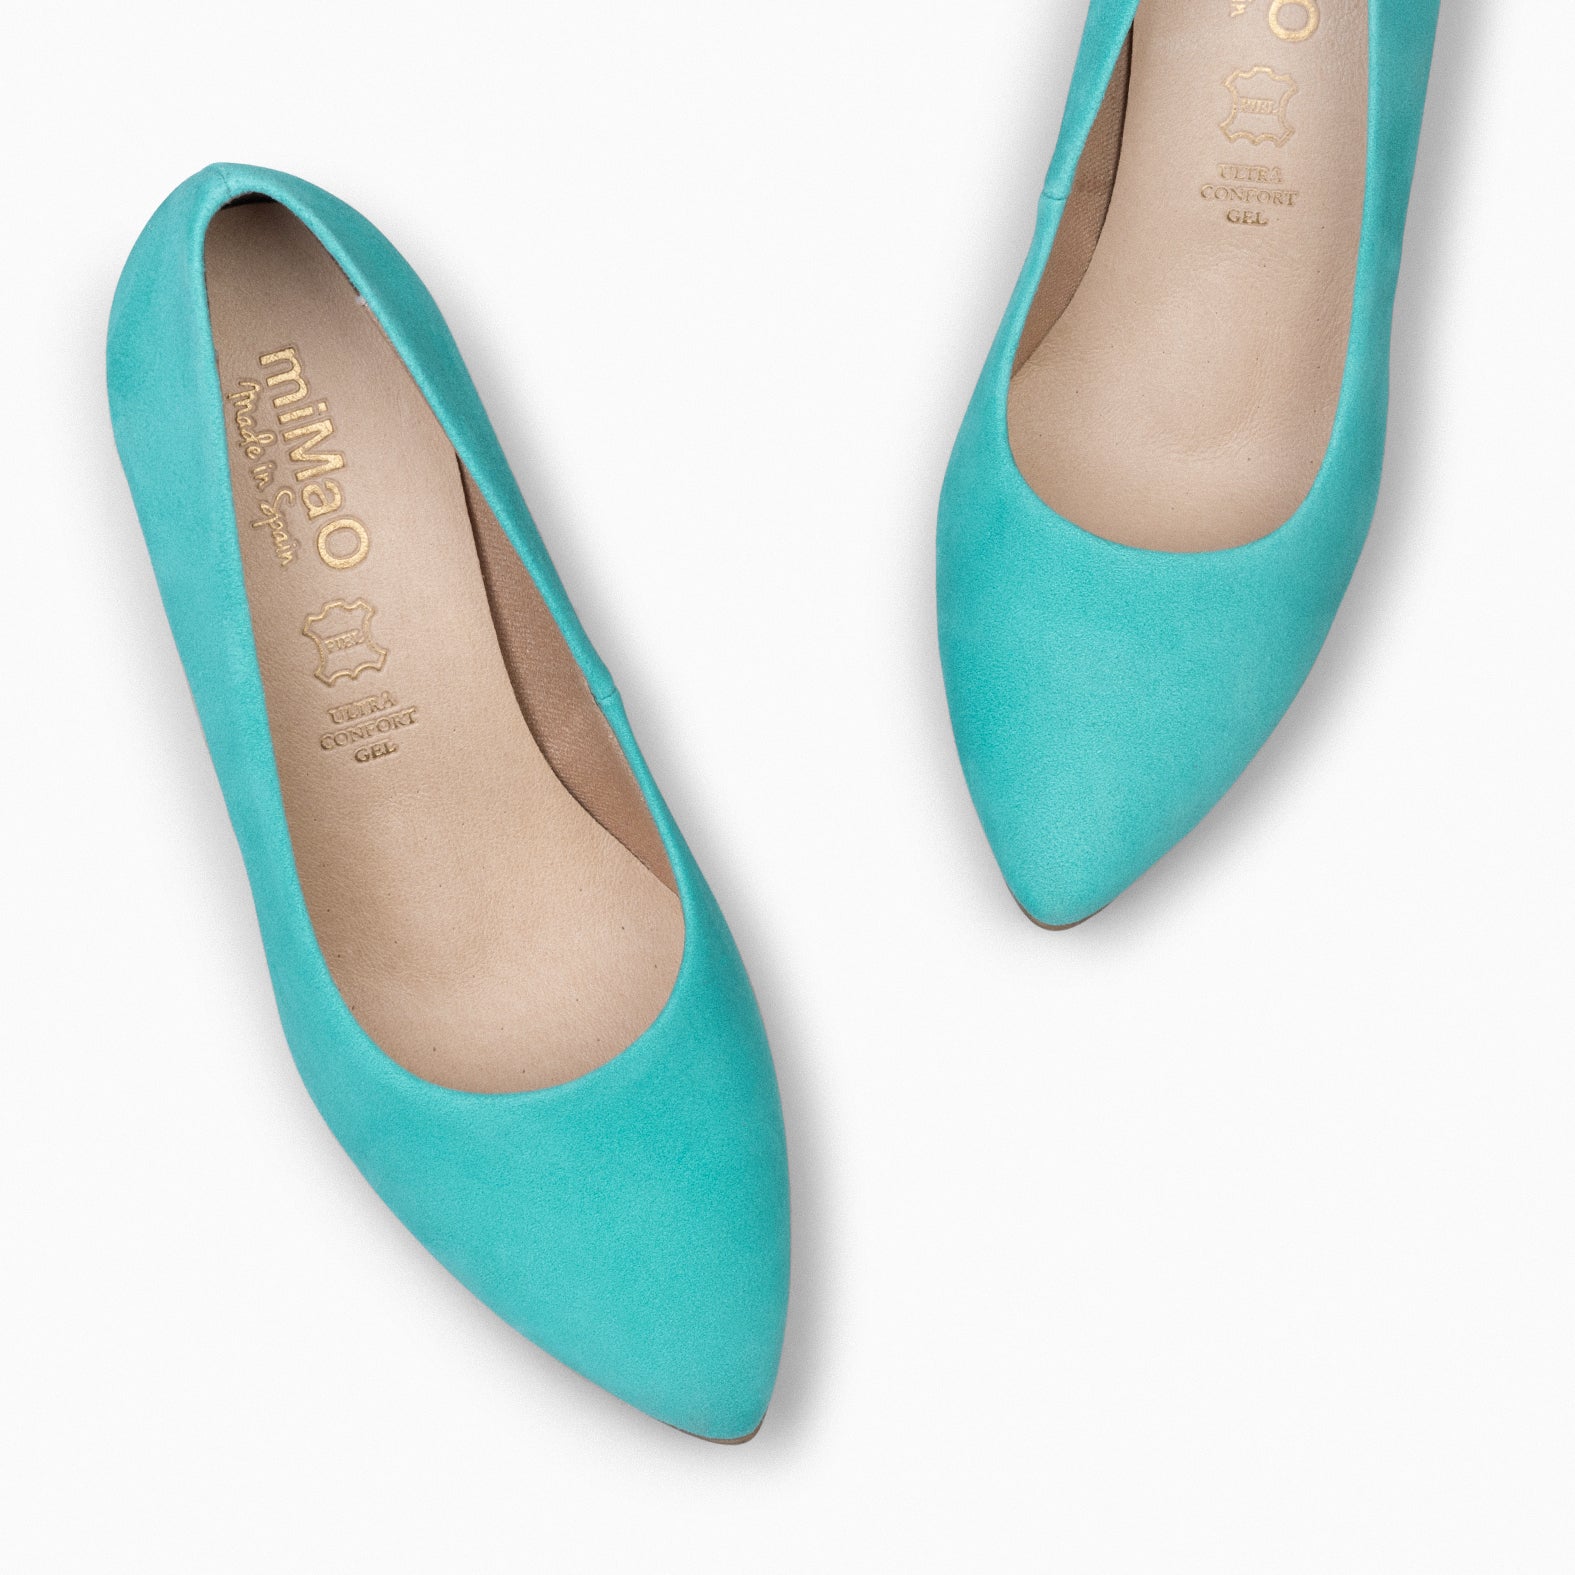 URBAN – TURQUOISE Suede high-heeled shoes 